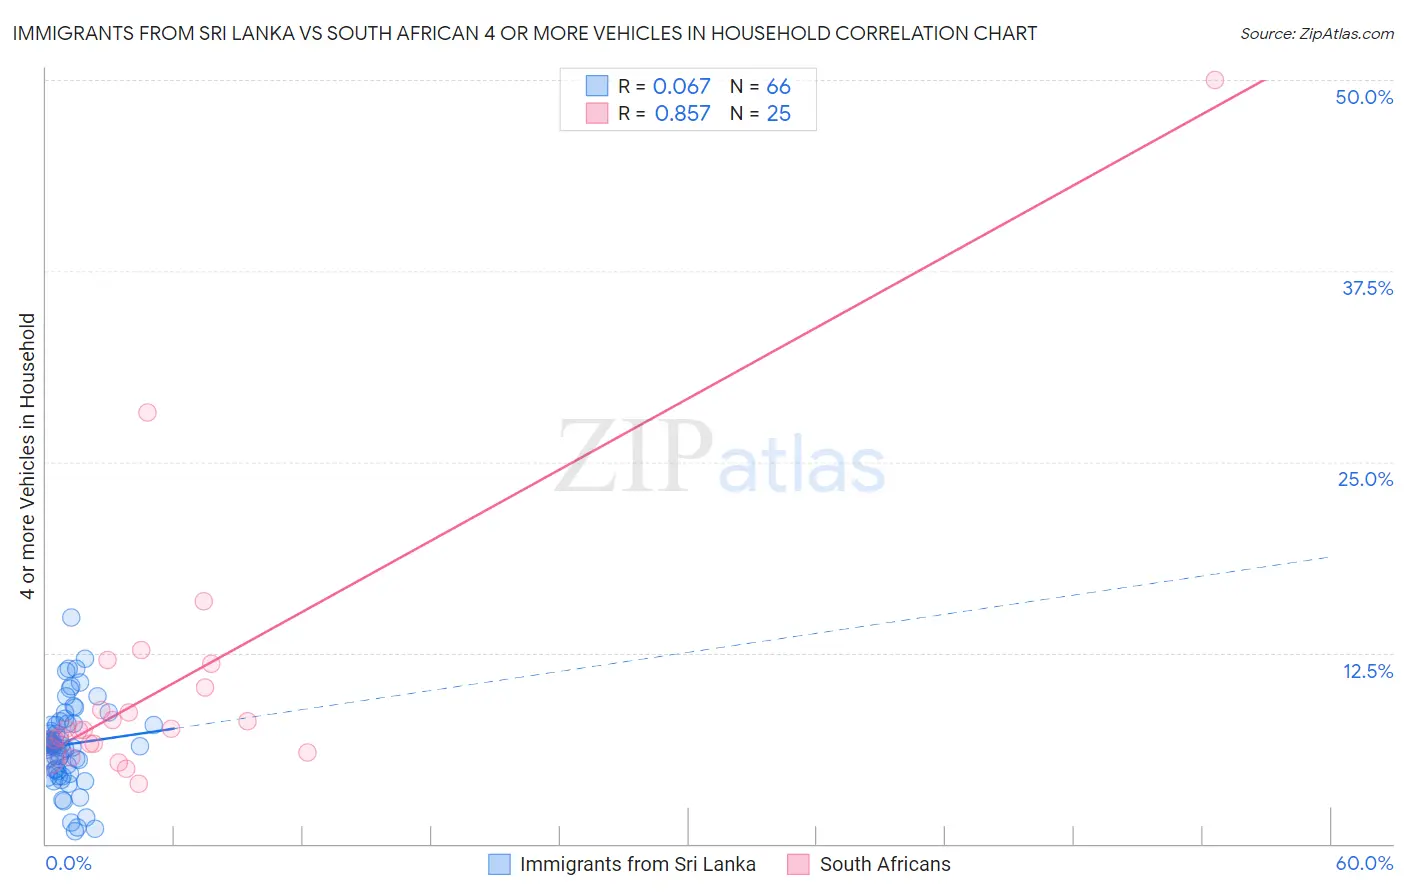 Immigrants from Sri Lanka vs South African 4 or more Vehicles in Household